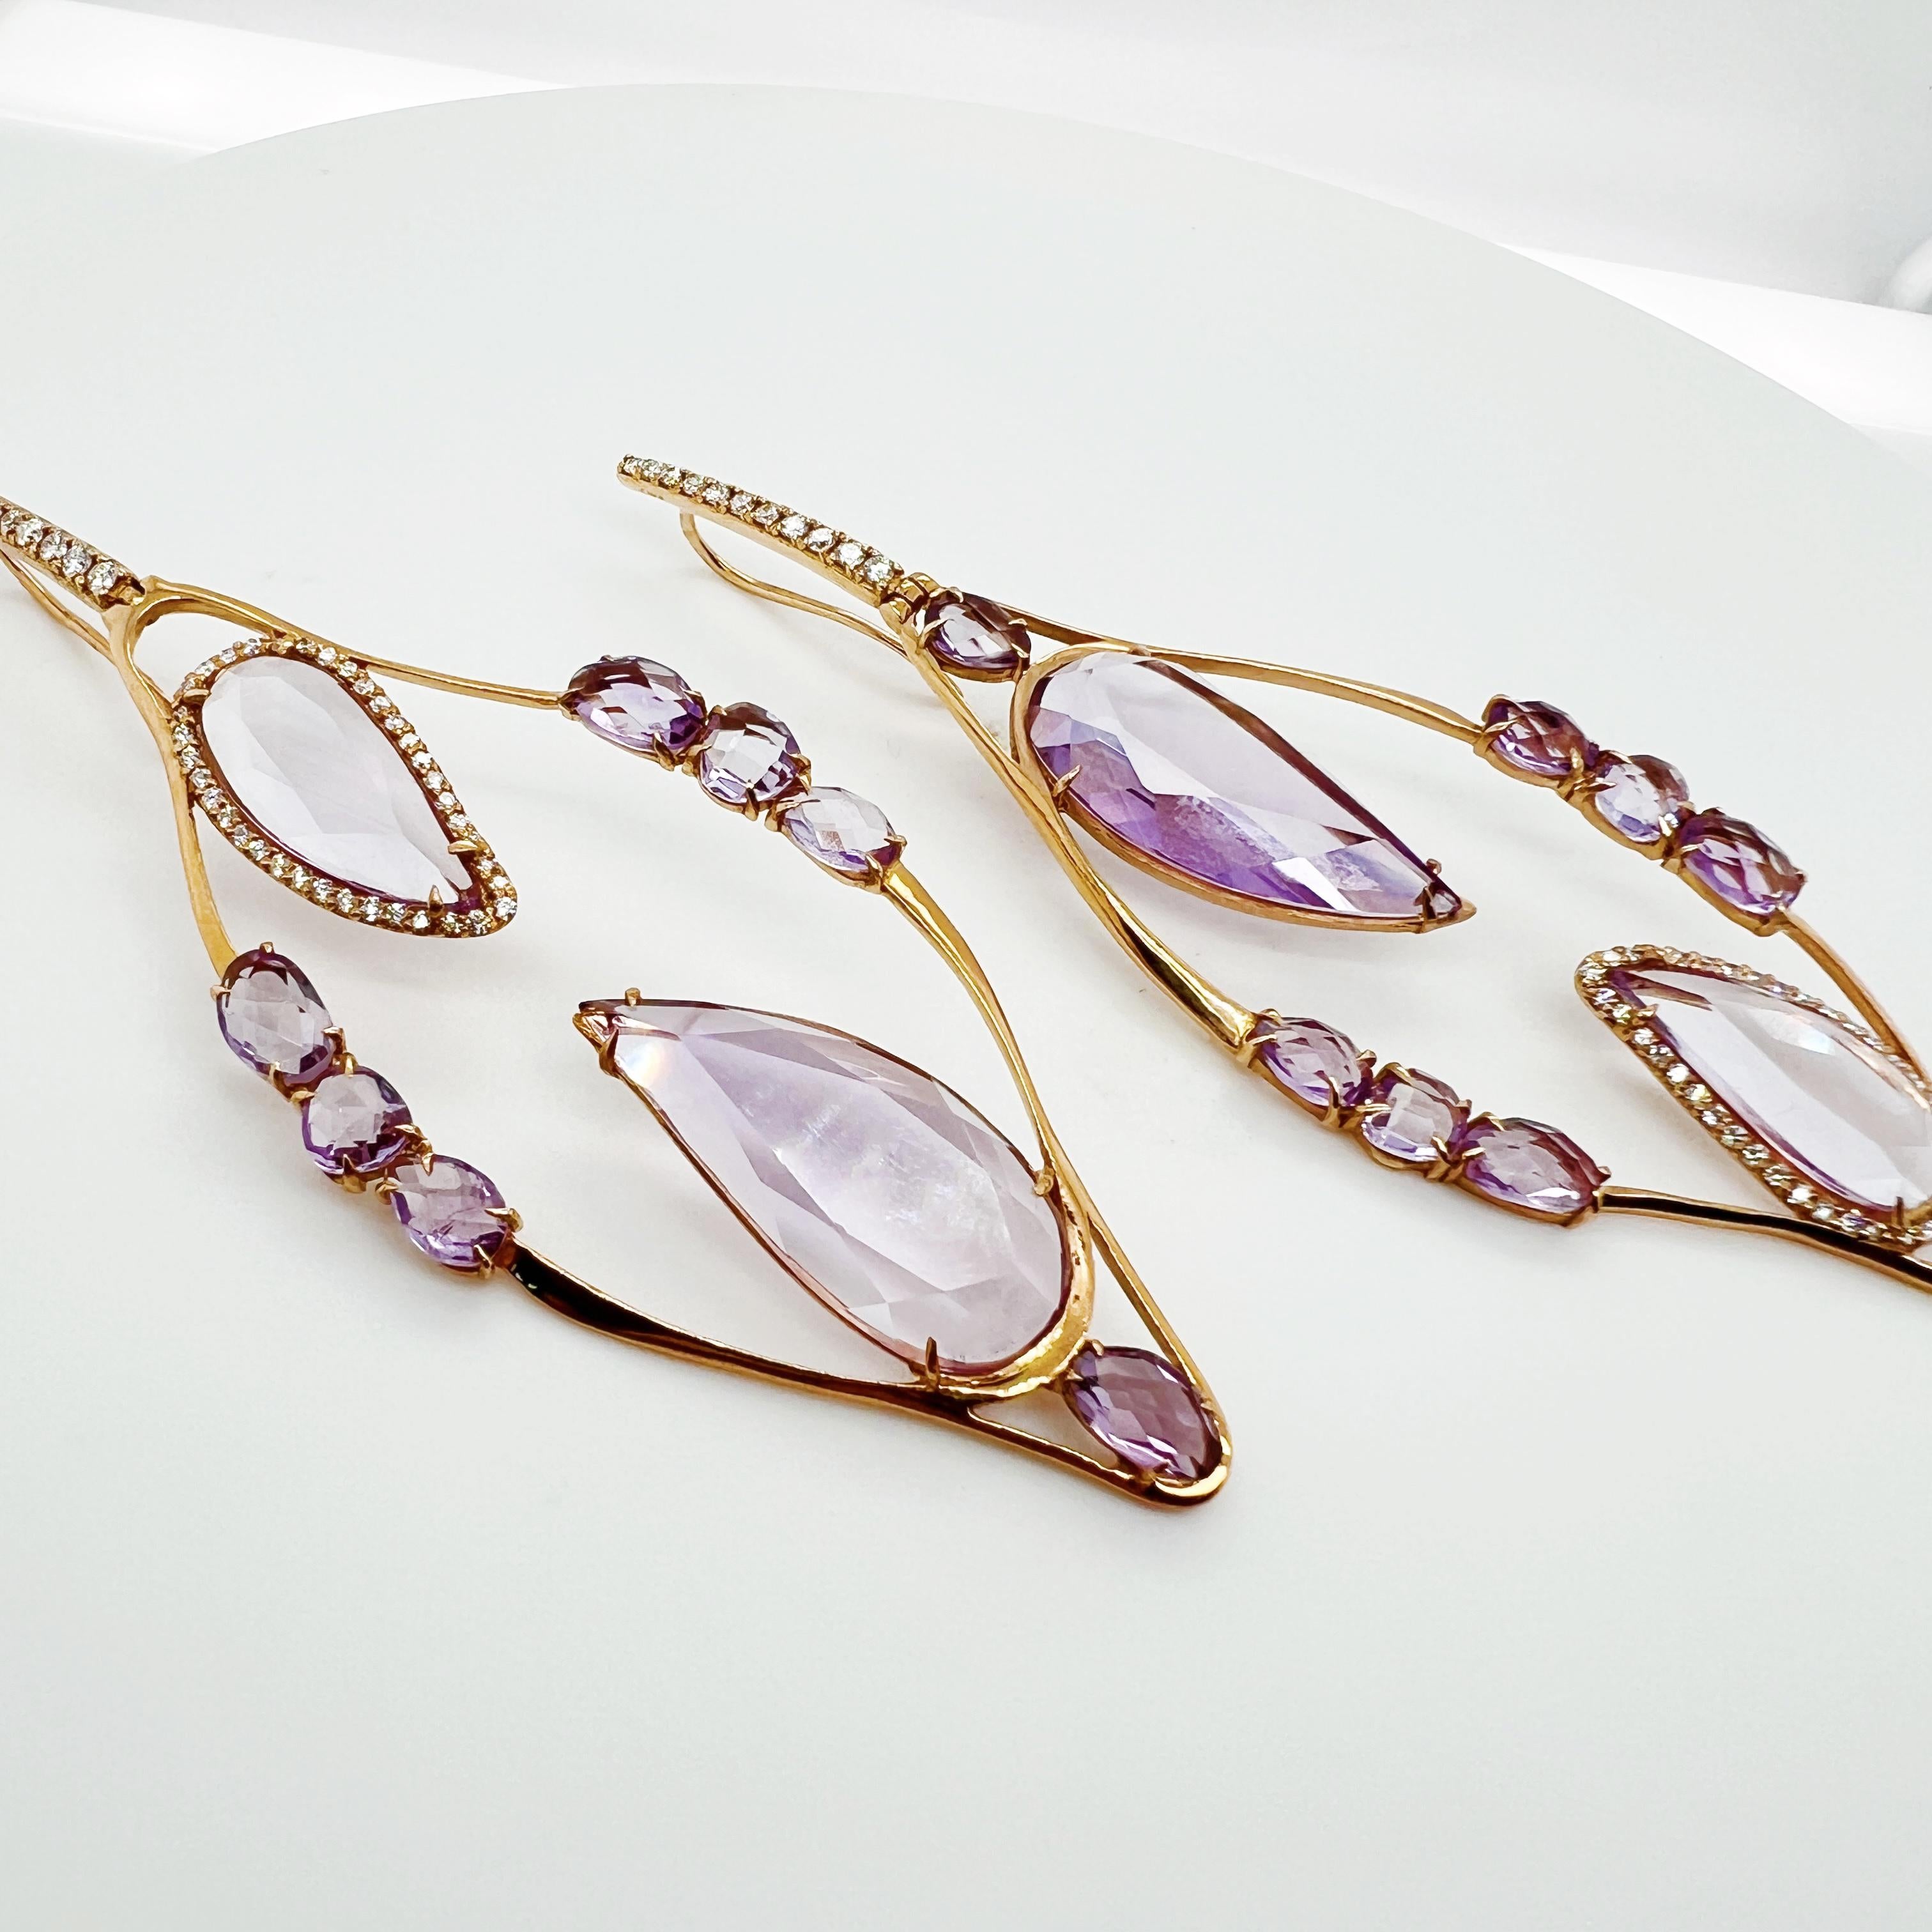 All of our jewellery is made by Italian Artisans to guarantee the Made In Italy manufacturing. 

The 18kt Pink Gold Earrings with Amethyst drops and Natural Diamonds is an everyday piece of jewelry. 
They are beautifully designed and crafted with